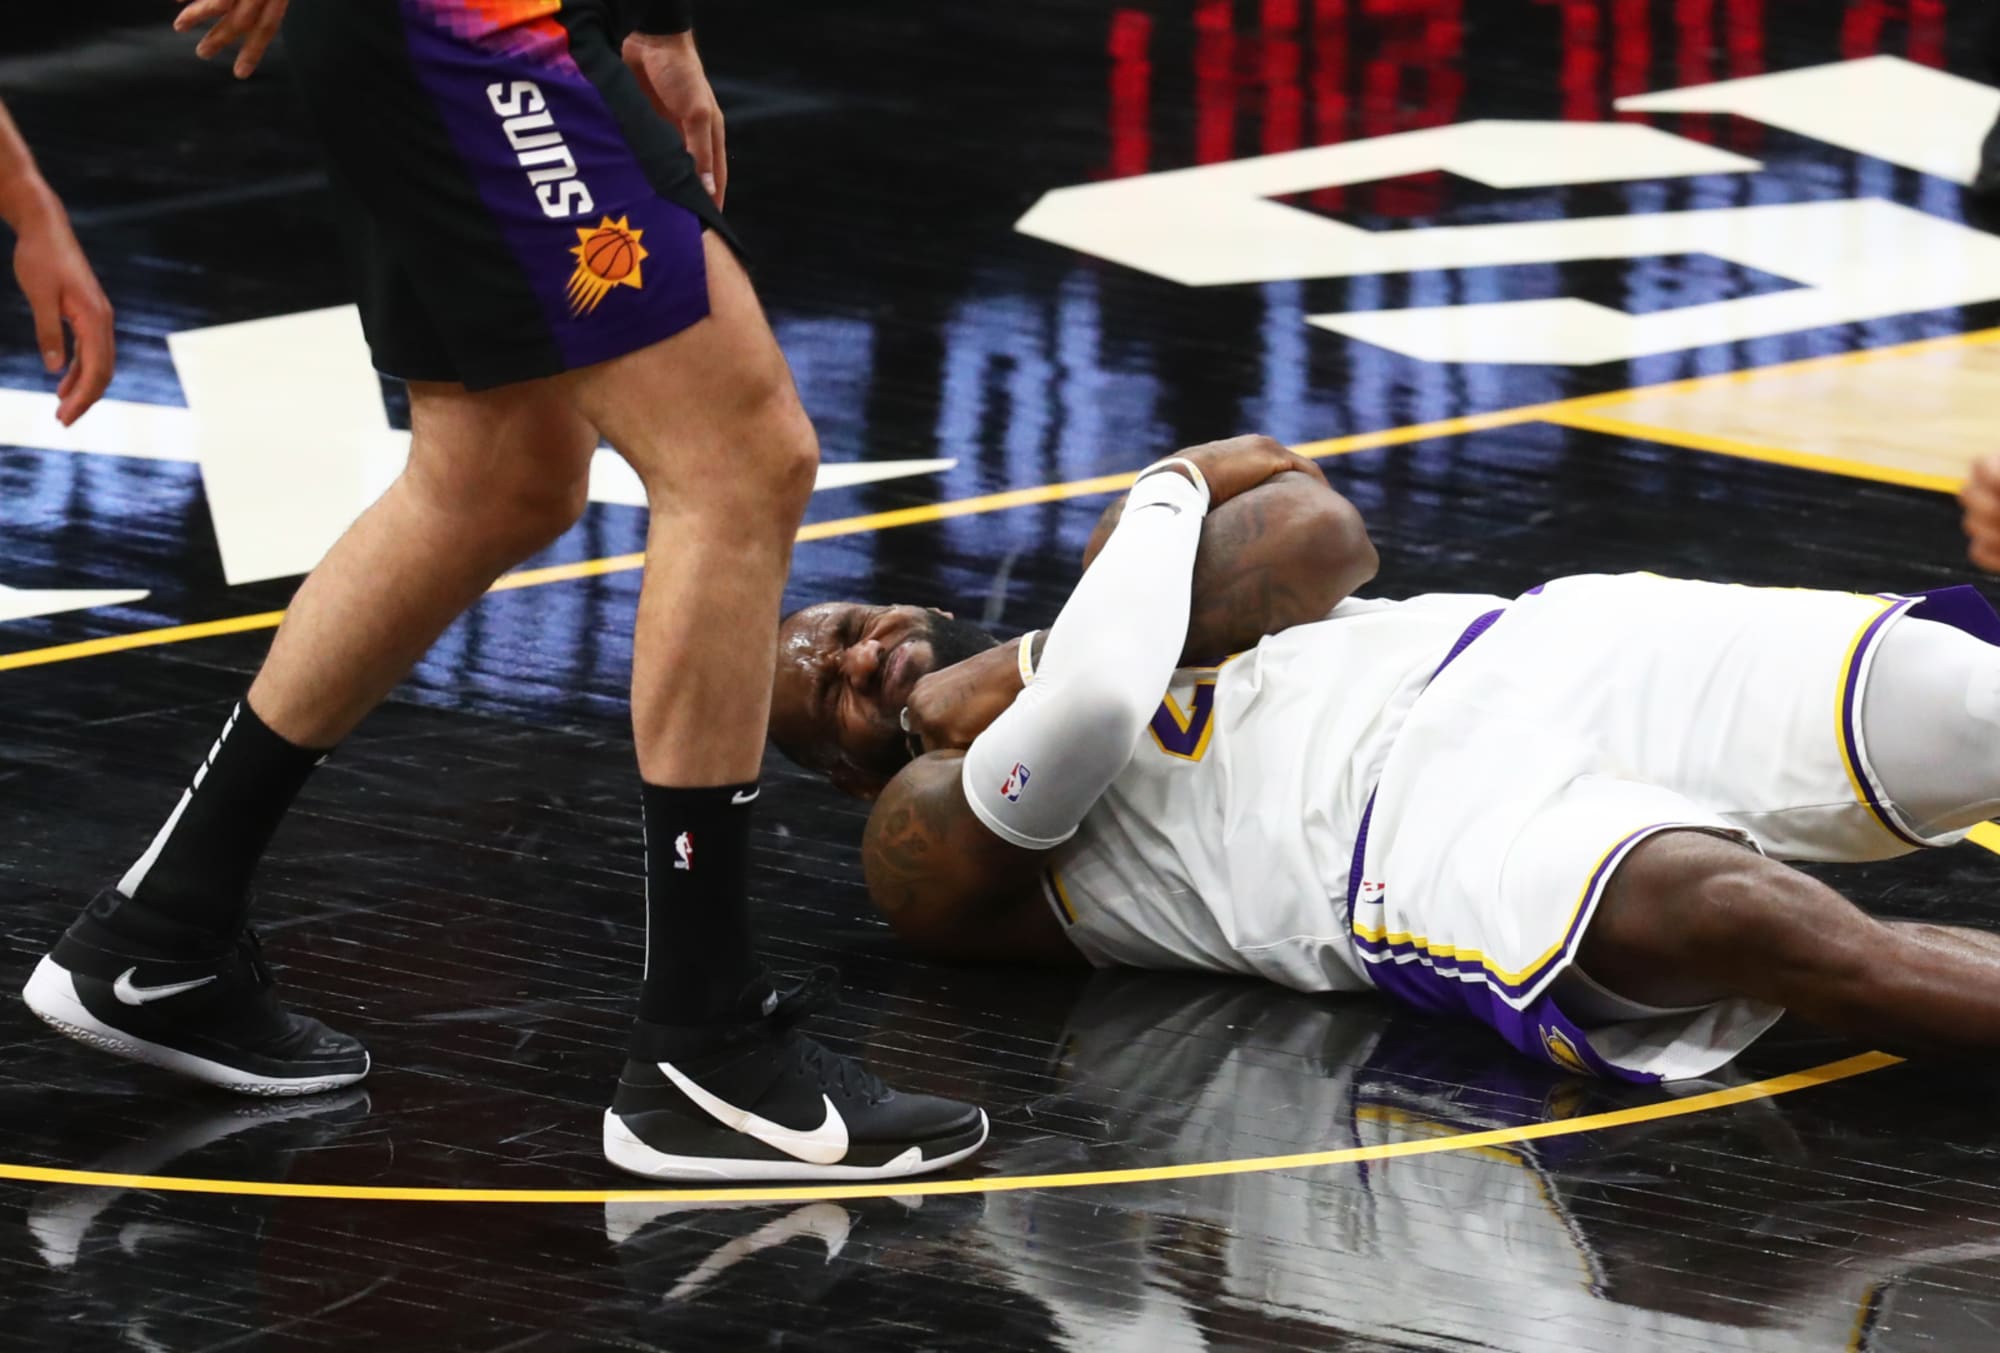 NBA fans once again roast LeBron James after suffering an apparent injury